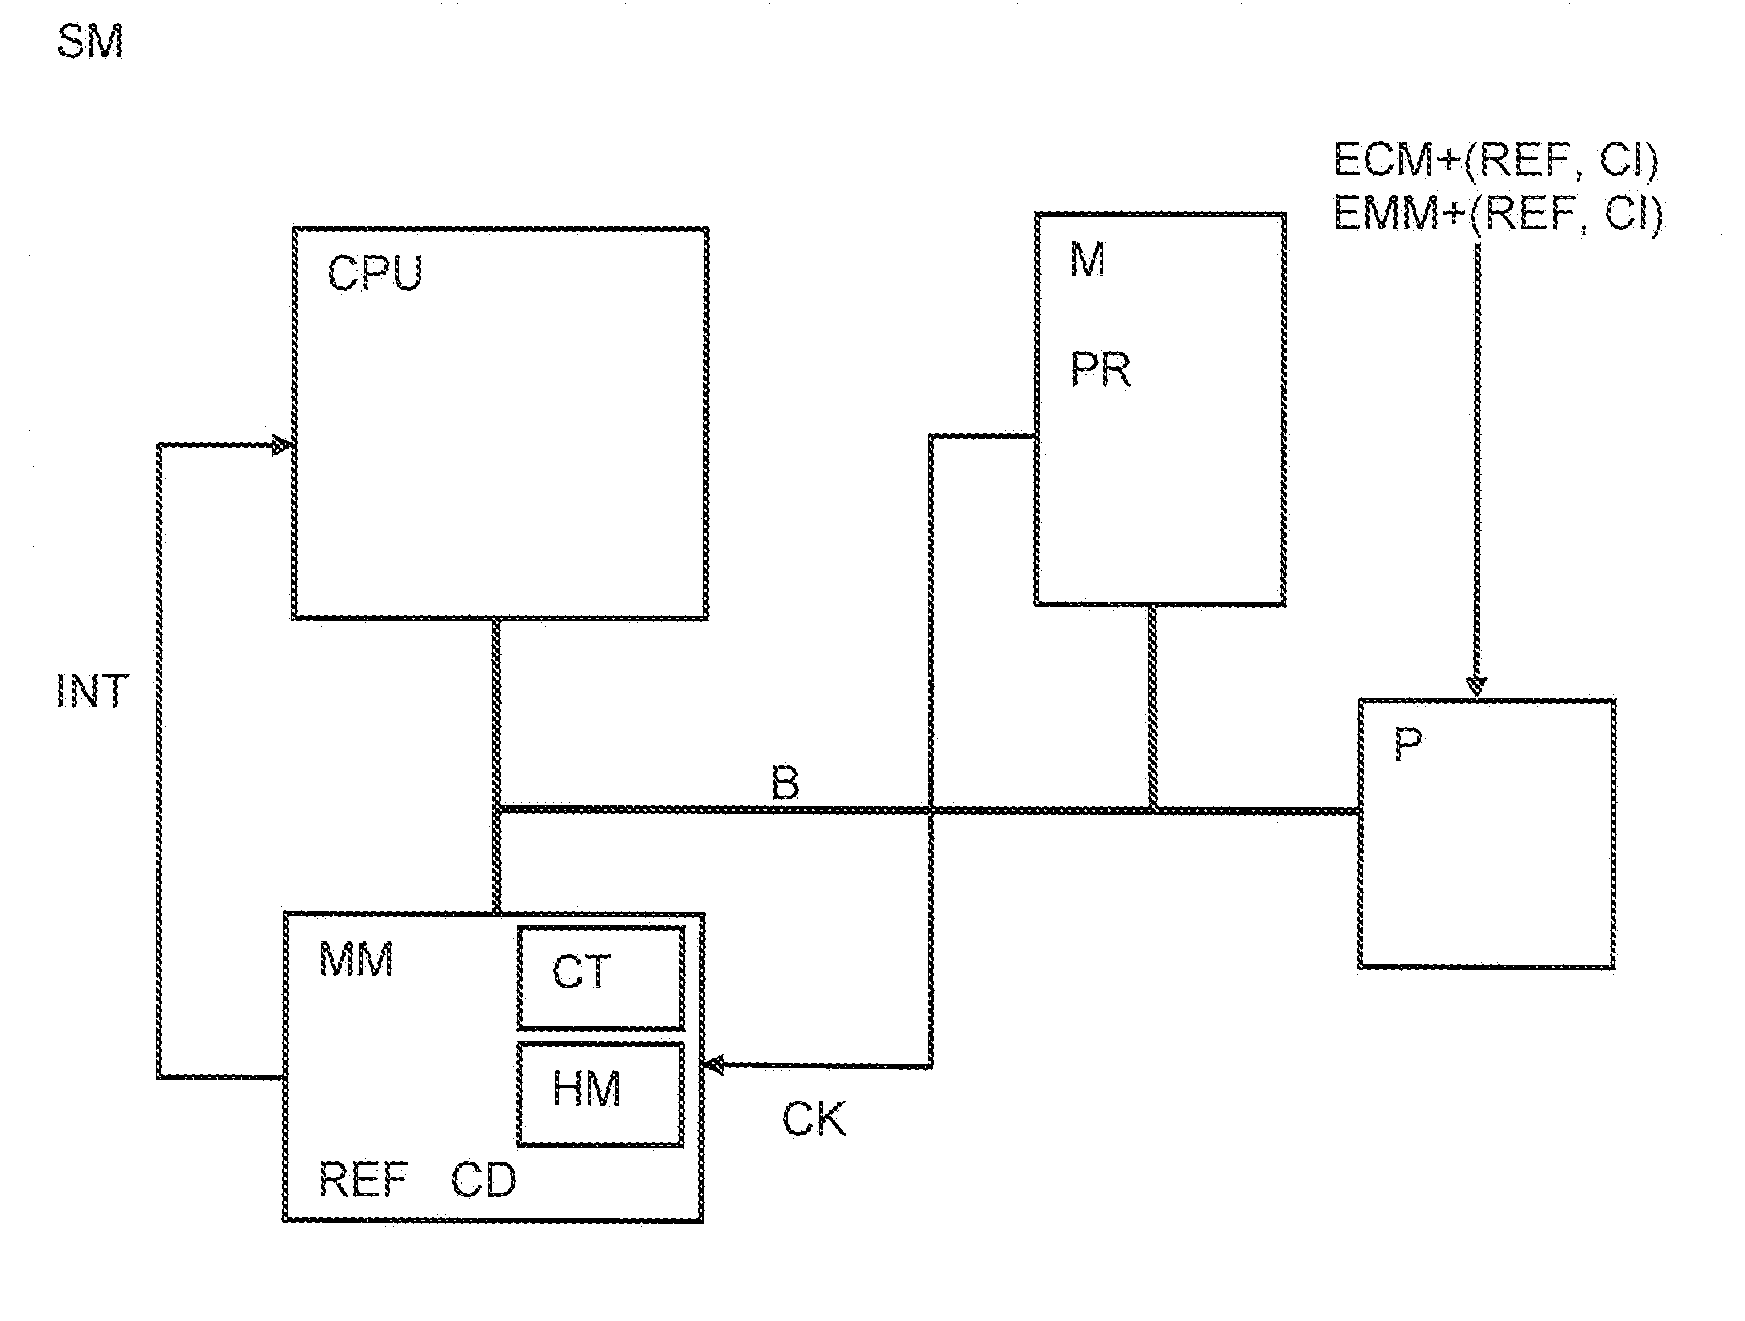 Method for monitoring execution of data processing program instructions in a security module